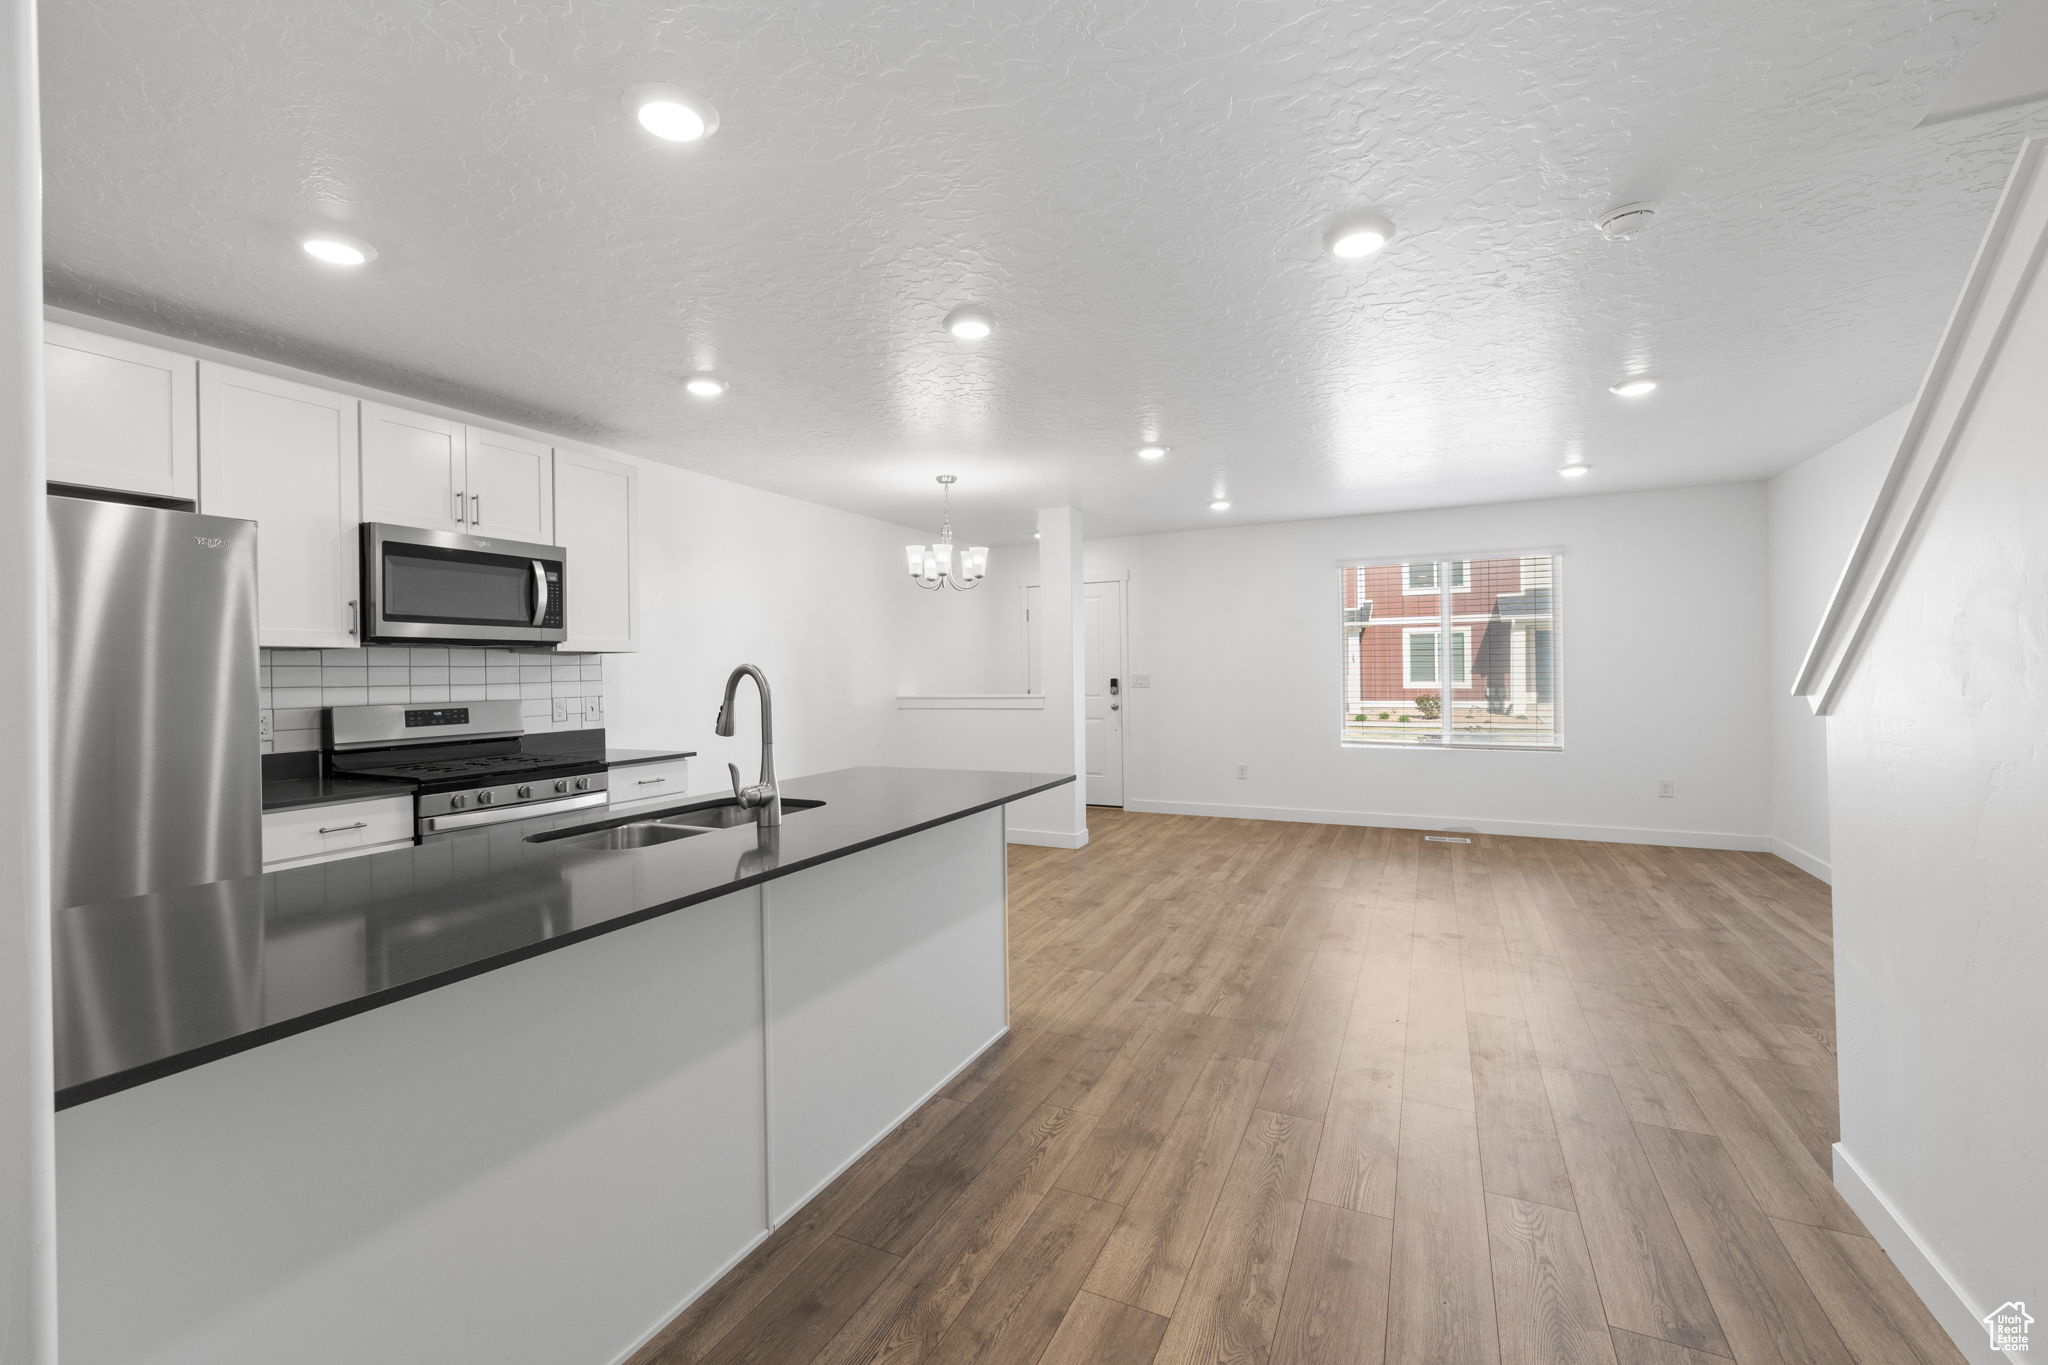 Kitchen featuring dark wood-type flooring, stainless steel appliances, white cabinets, and sink